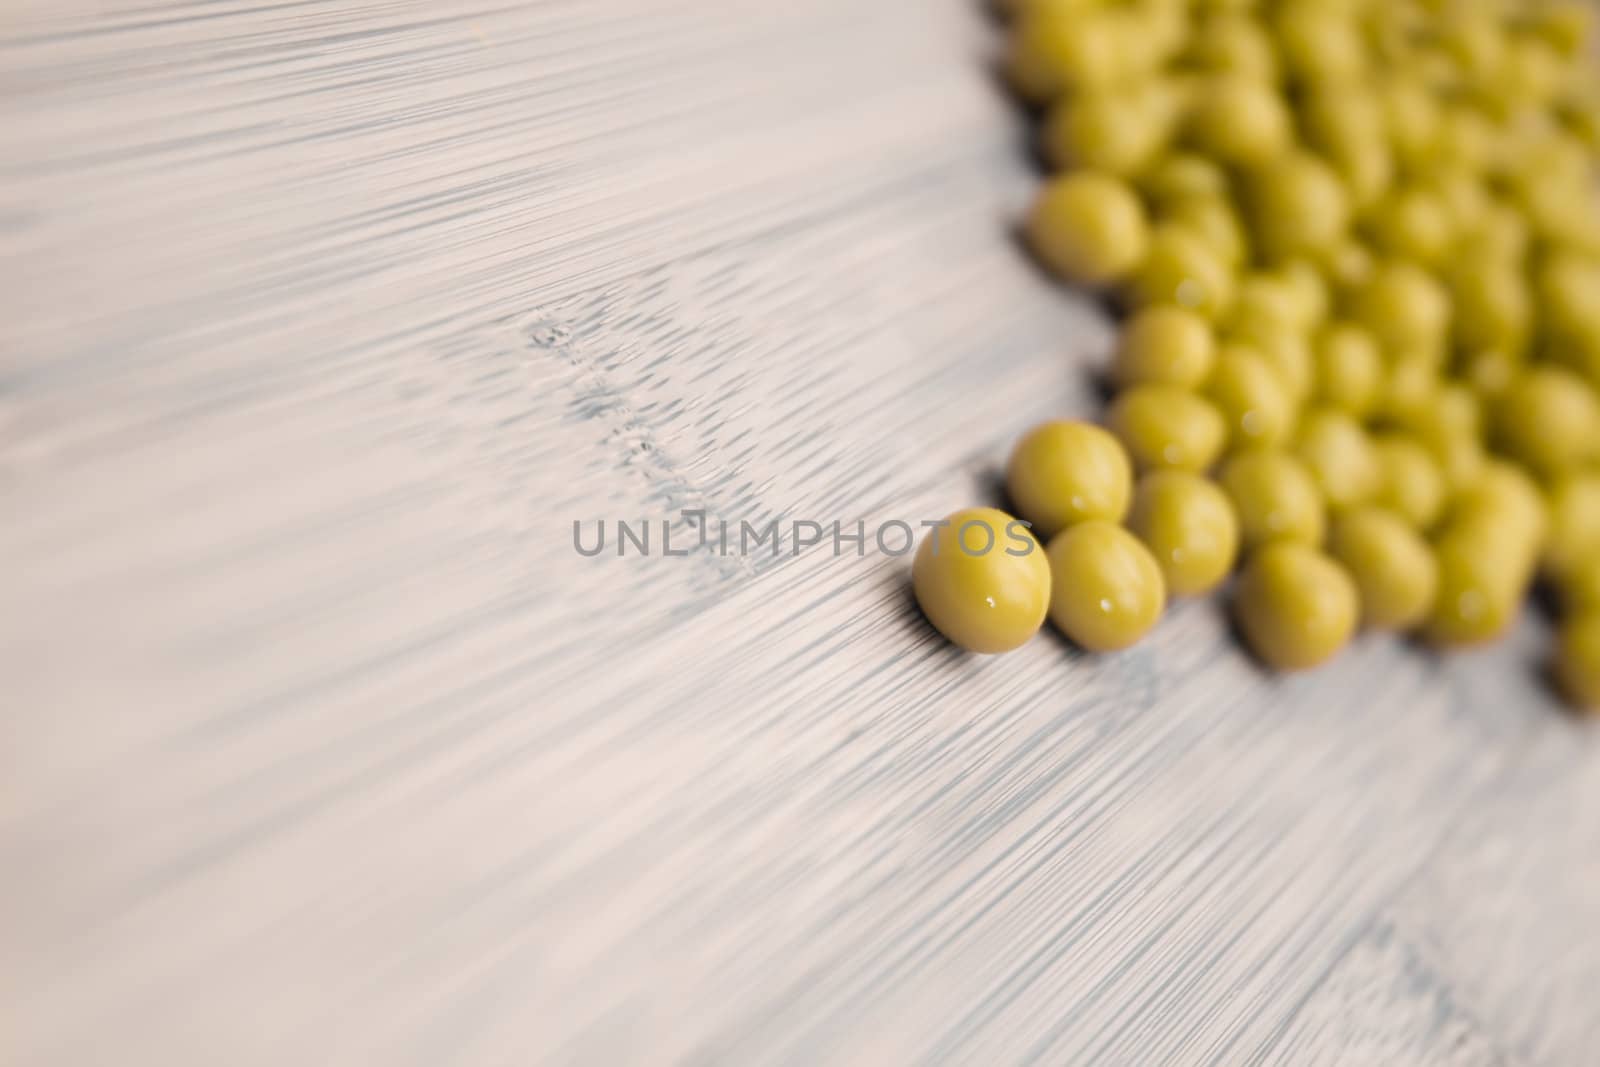 peas on wooden background by nubephoto